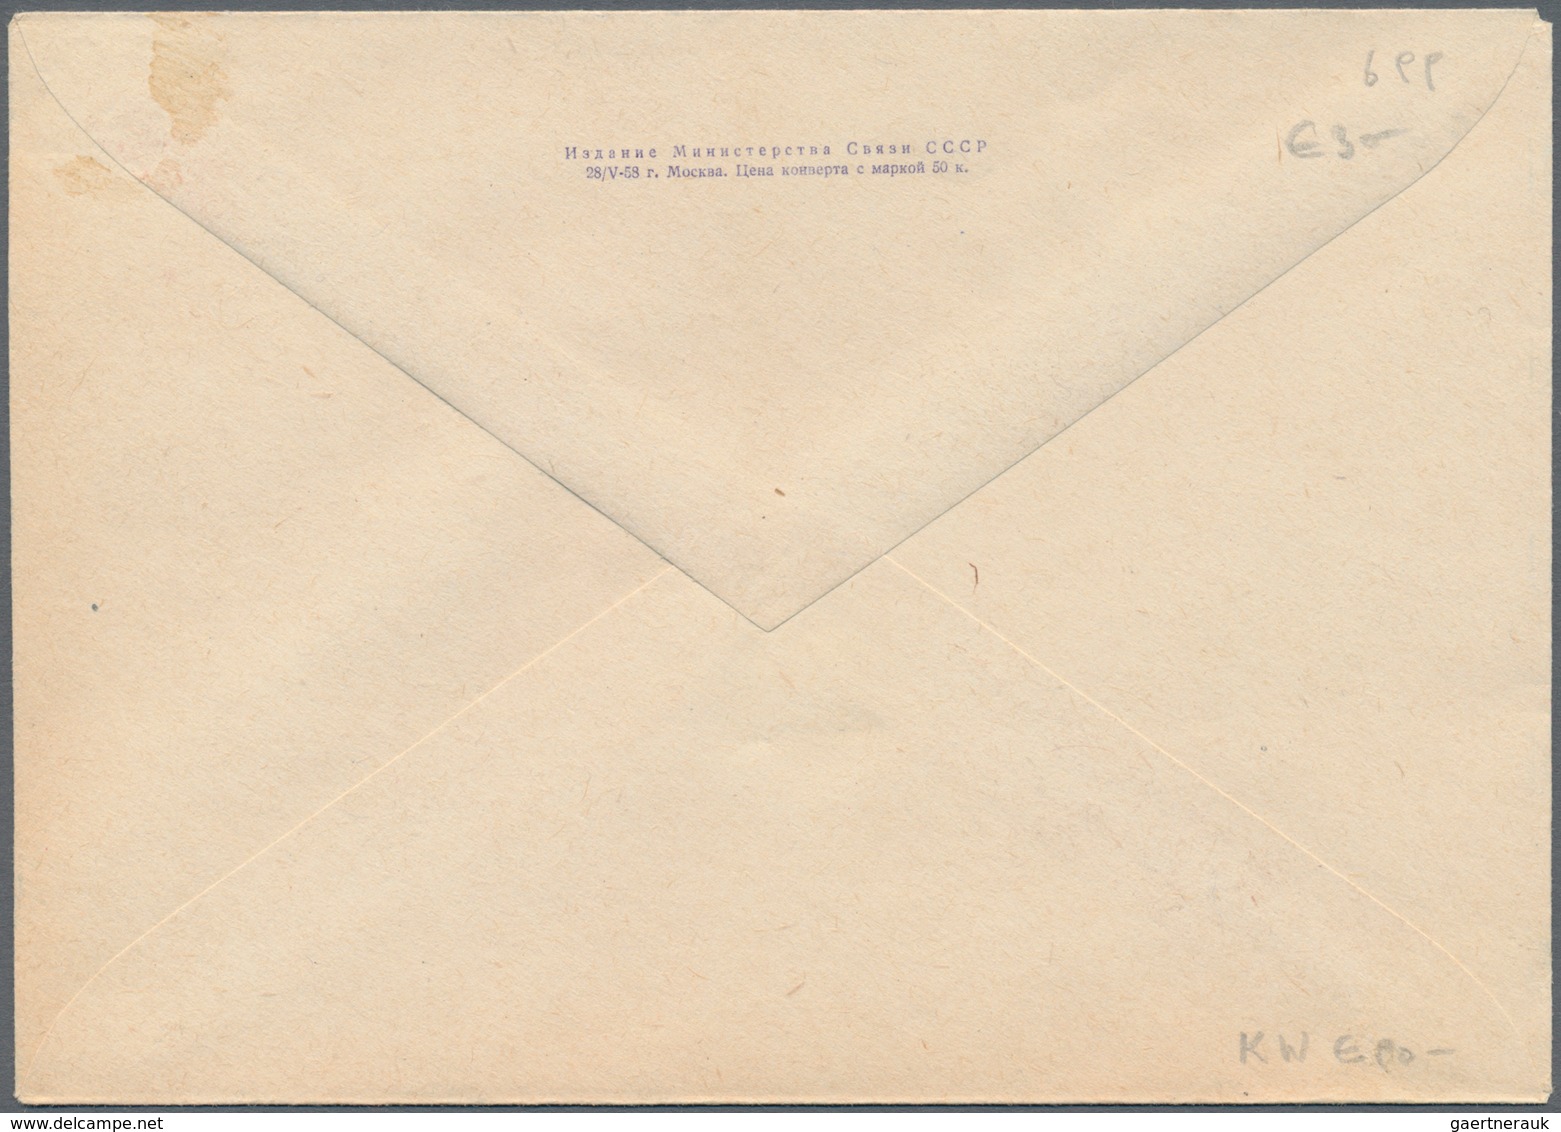 Sowjetunion - Ganzsachen: 1958, Pictured Envelope With Hunters In Kirgistan With Eagle, Backside Lit - Unclassified